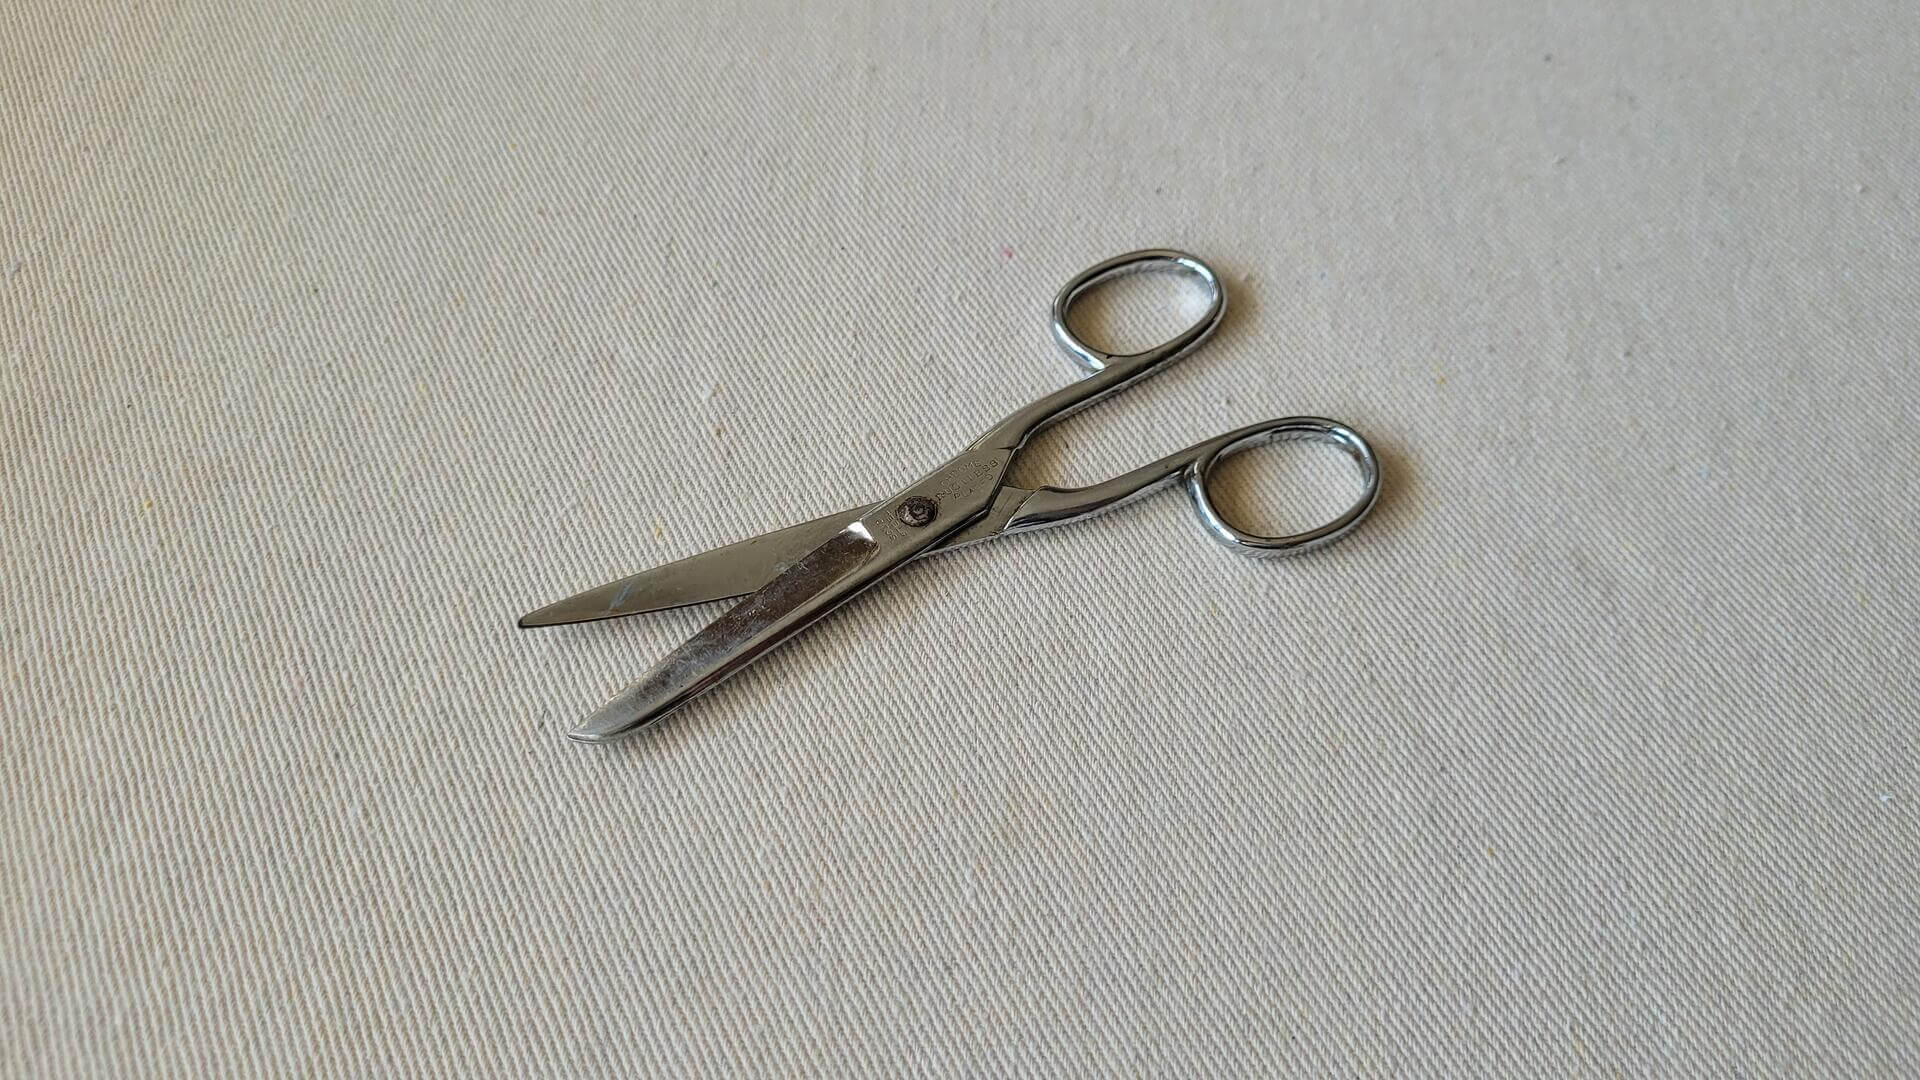 richards-snip-snap-shears-scissors-5-inches-steel-chrome-plated-vintage-made-in-sheffield-england-dressmaker-upholstery-cutting-tools